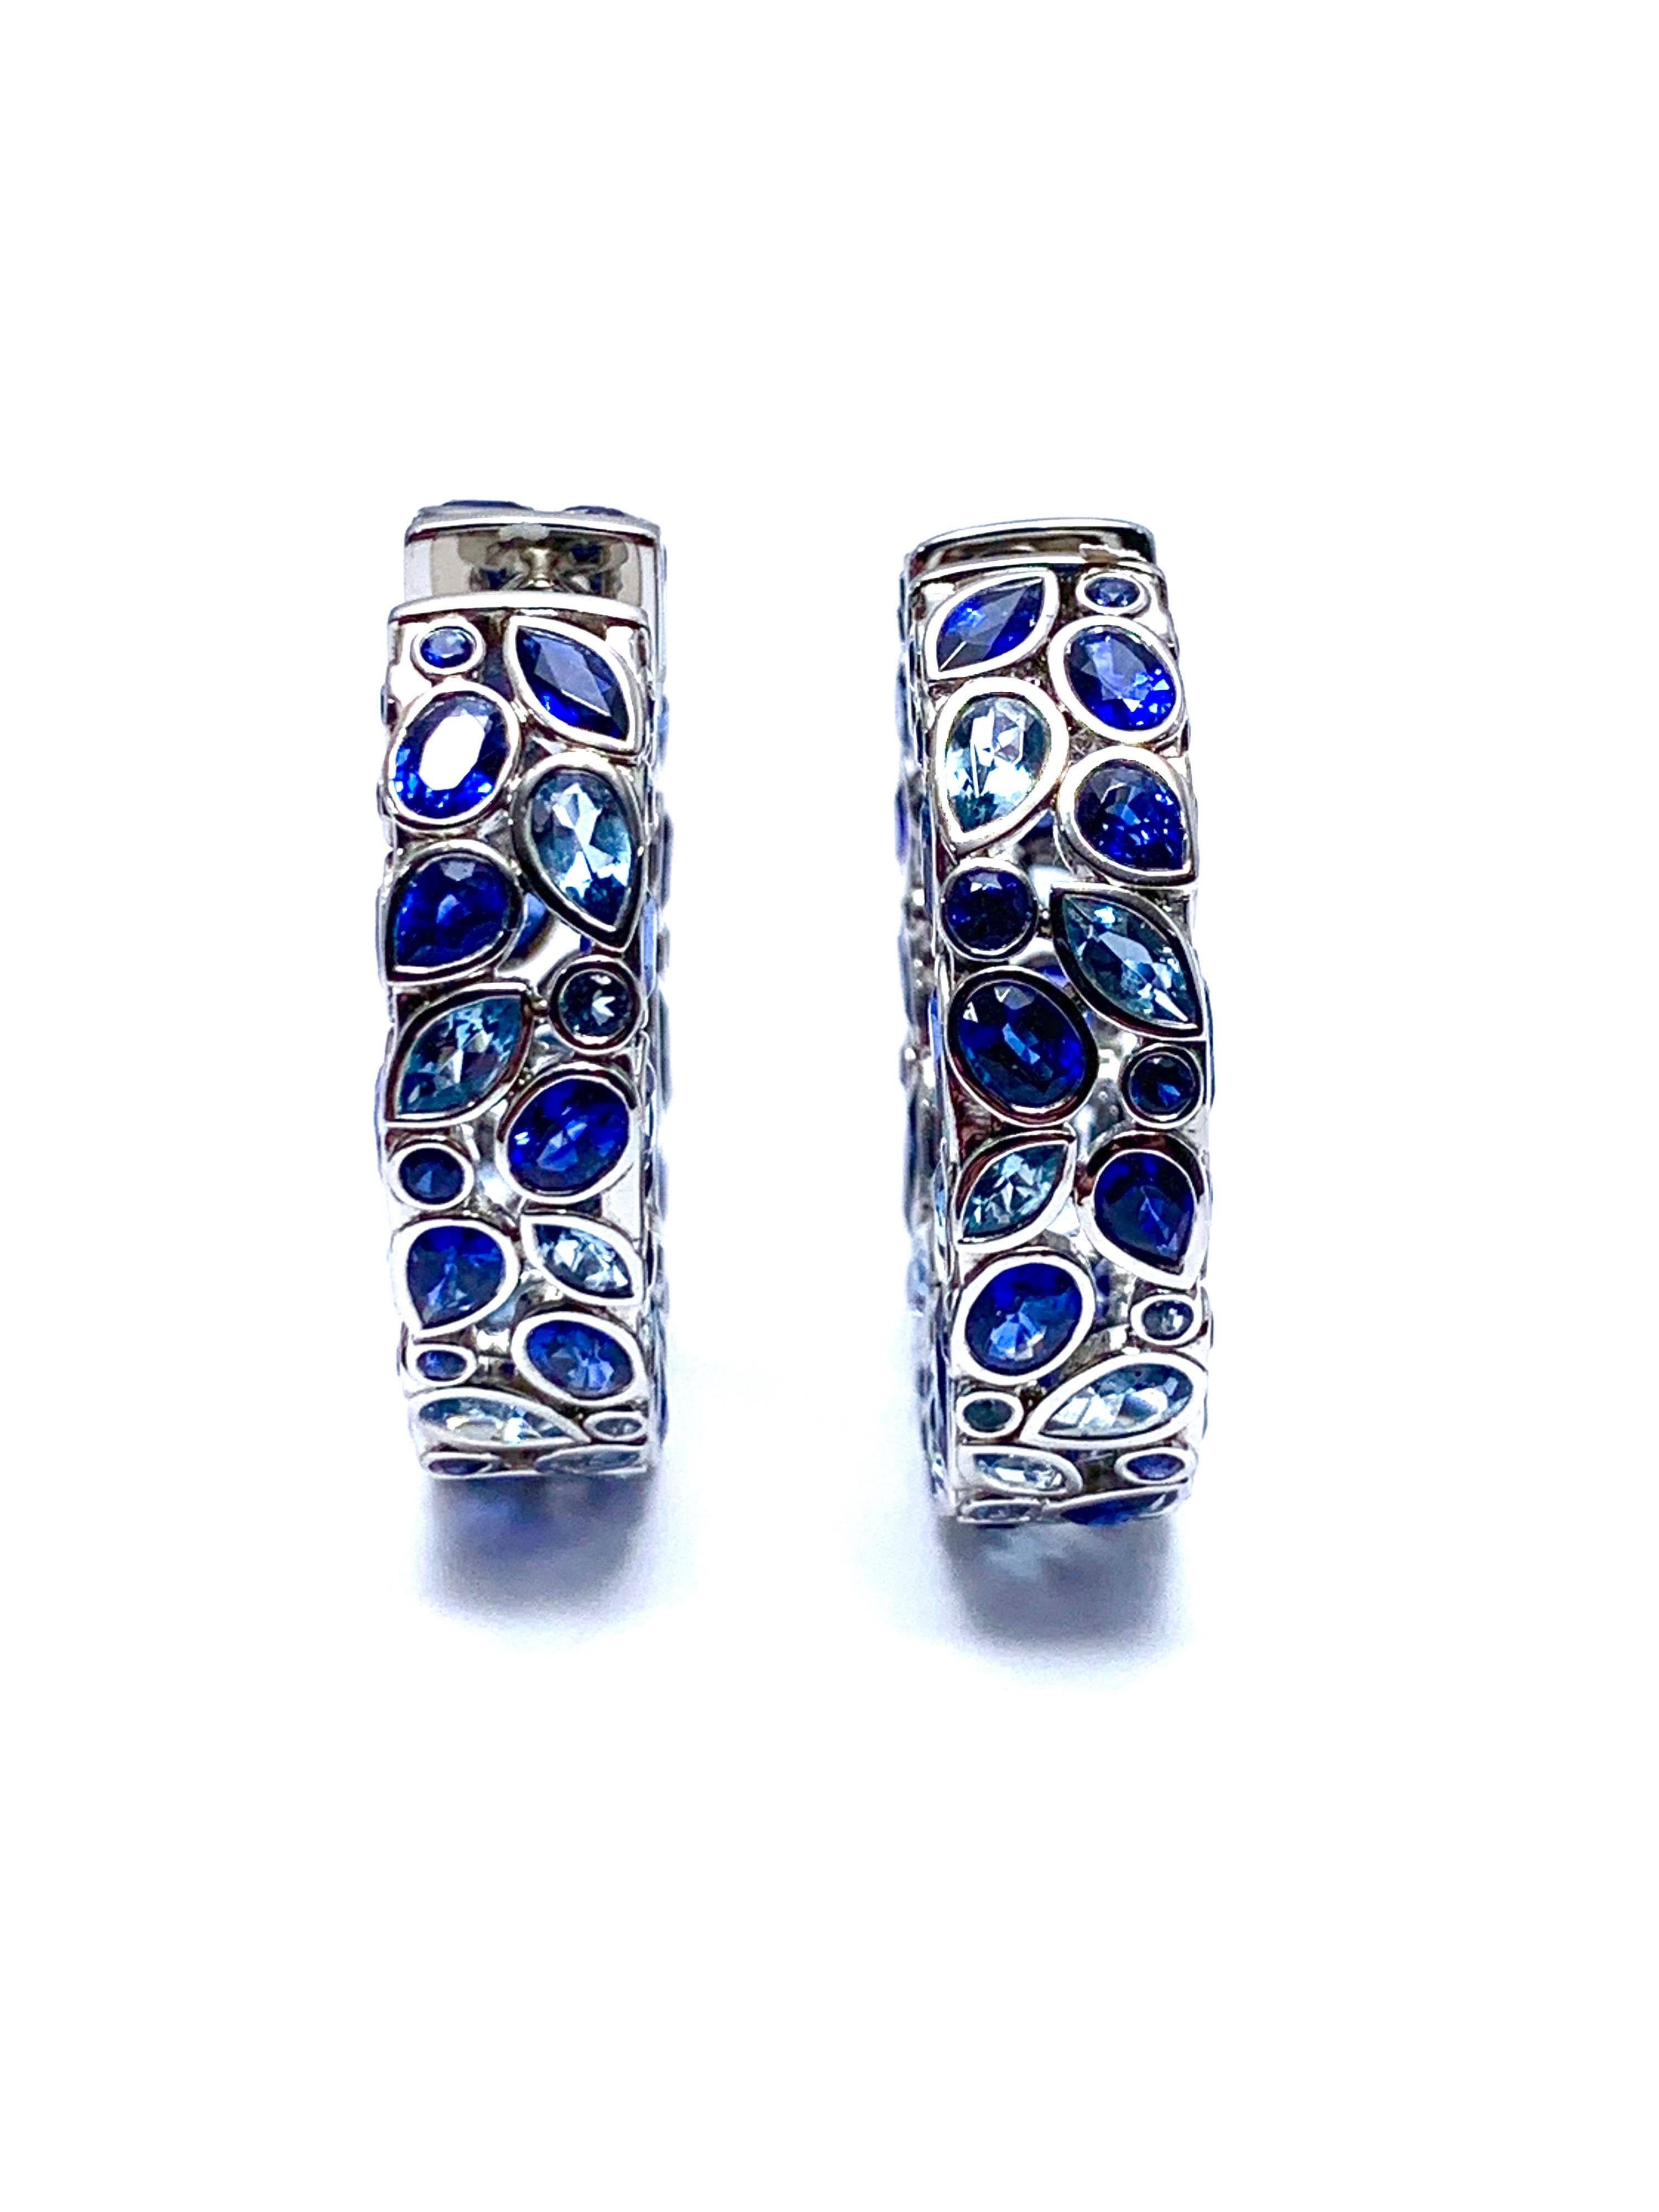 An absolutely stunning Robert Procop De La Vie Collection pair of earrings! The earrings are handcrafted in platinum with bright blue Sapphires and scintillating Aquamarines. There are 94 various shaped blue Sapphires totaling 10.26 carats, and 88